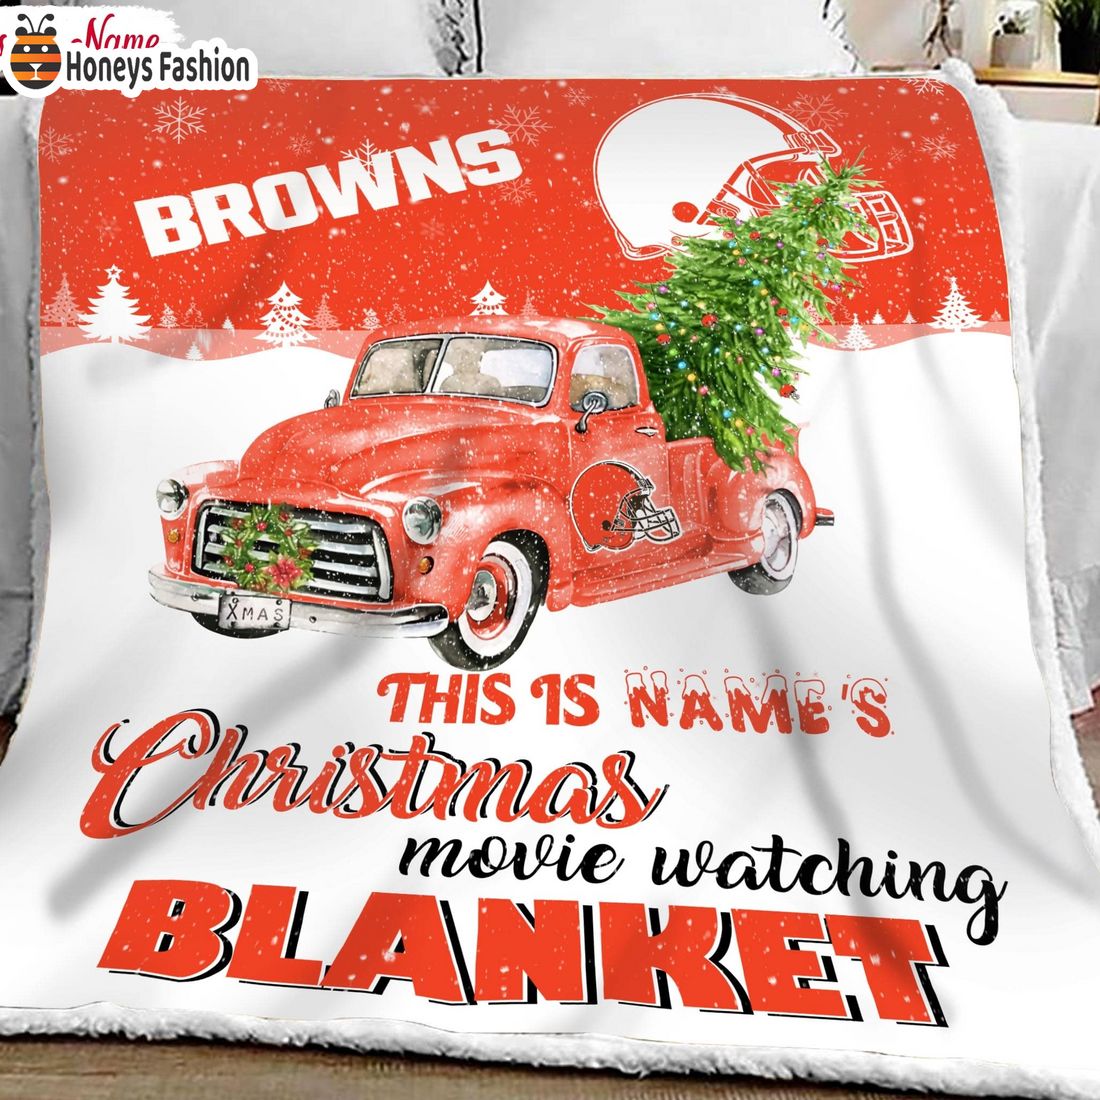 NFL Cleveland Browns Custom Name Christmas movie watching quilt blanket